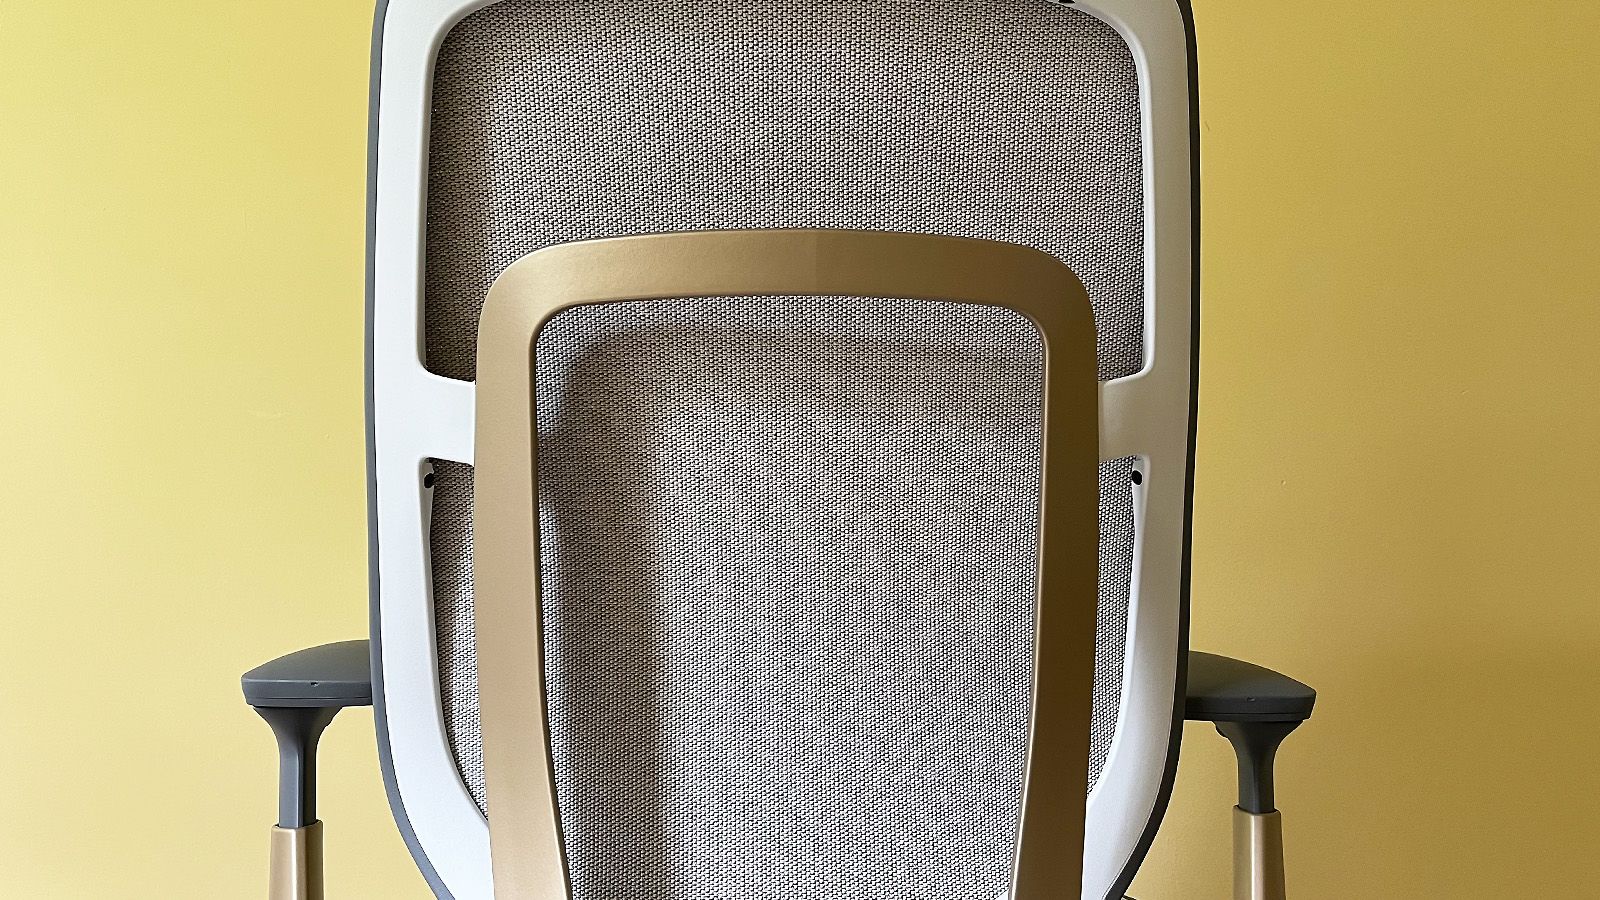 Steelcase Karman office chair review